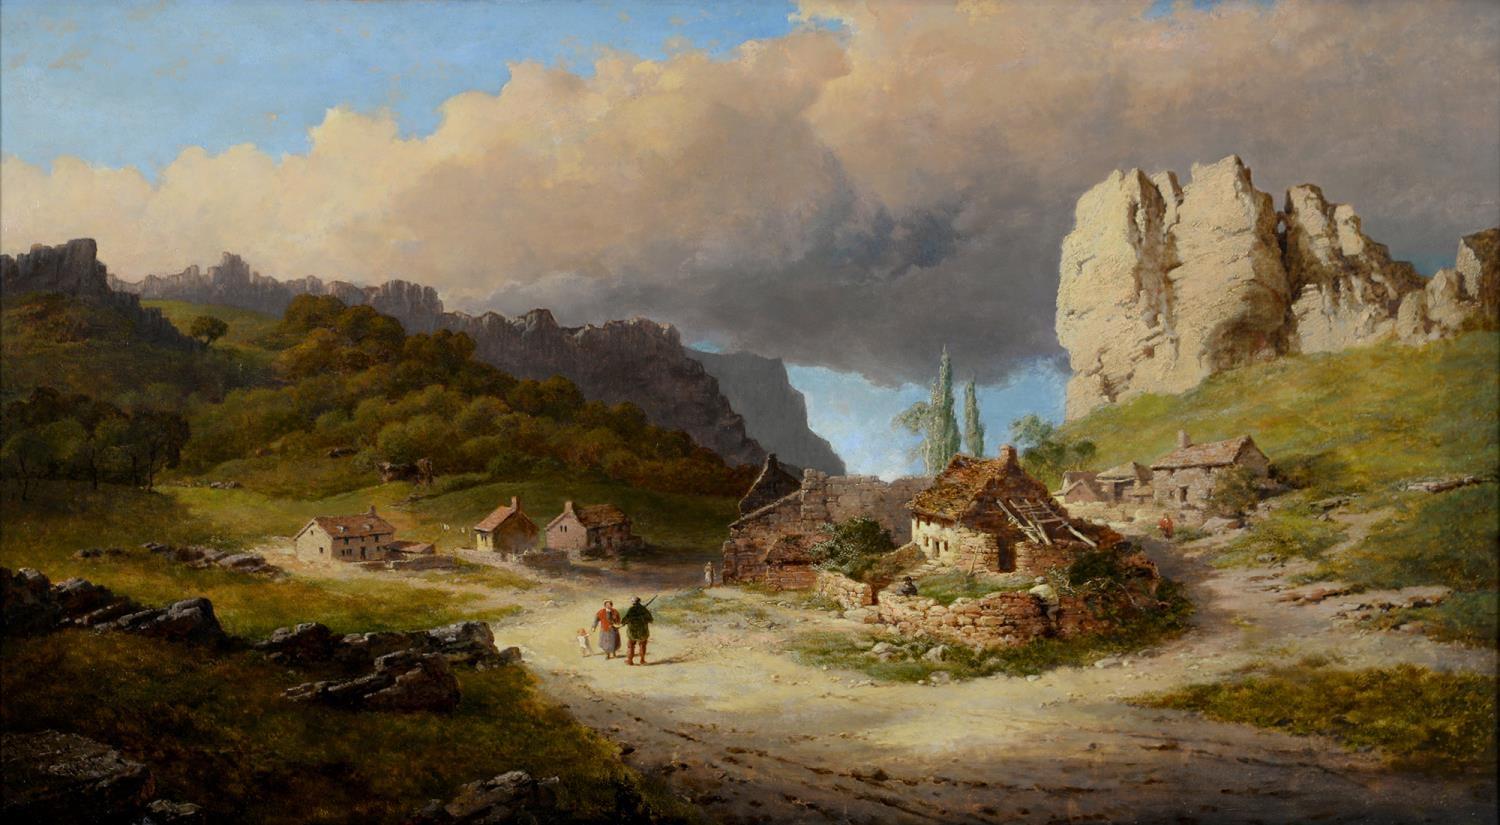 EDMUND JOHN NIEMANN (1813-1876) - THE LIME KILNS CHEDDAR, SIGNED, DATED '70 AND INSCRIBED, OIL ON